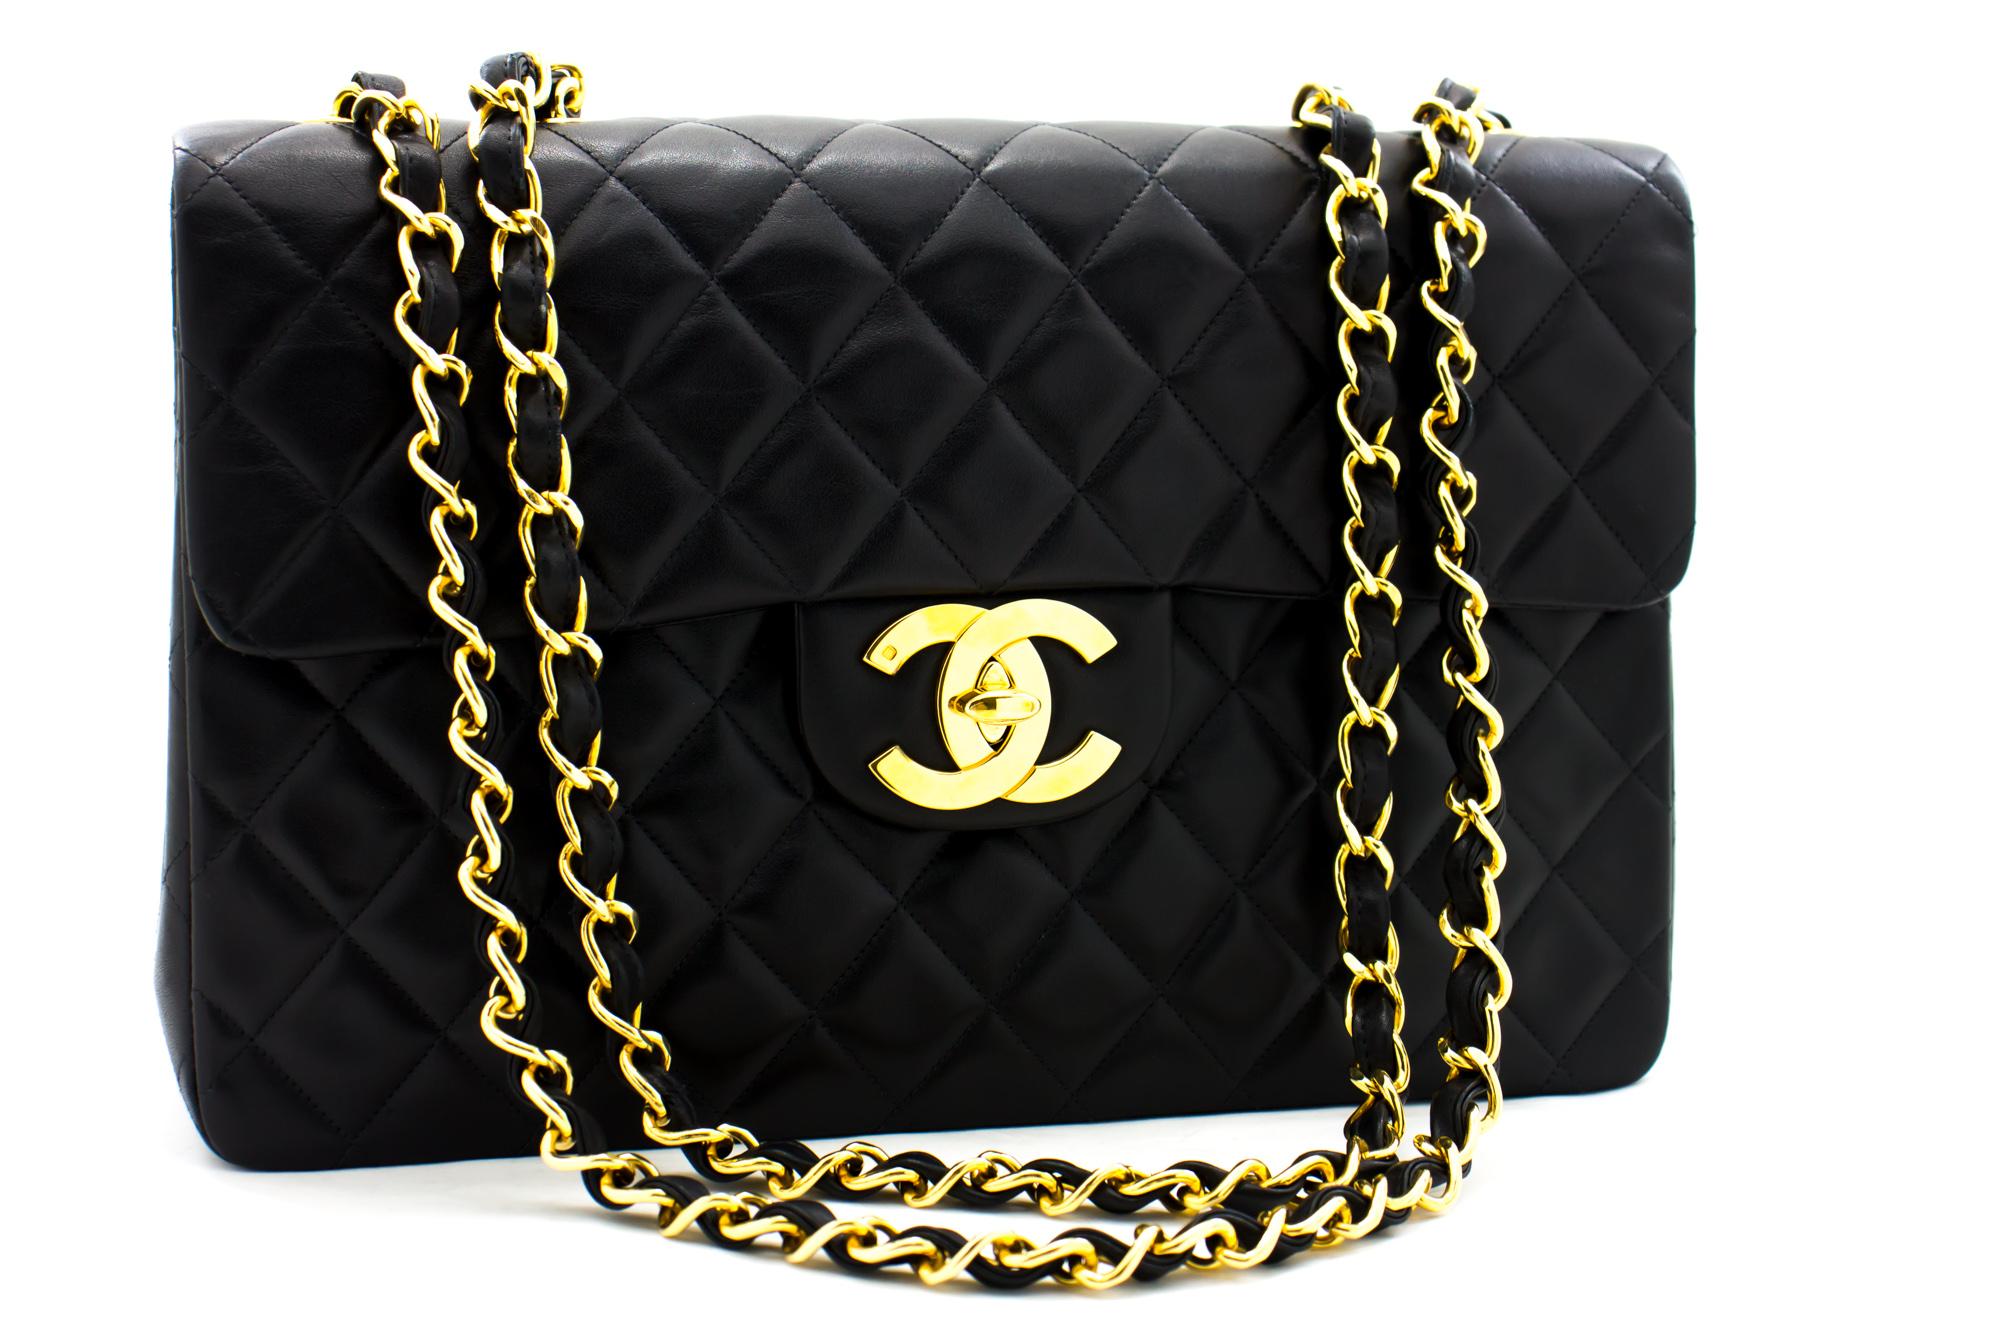 An authentic CHANEL Classic Maxi 13